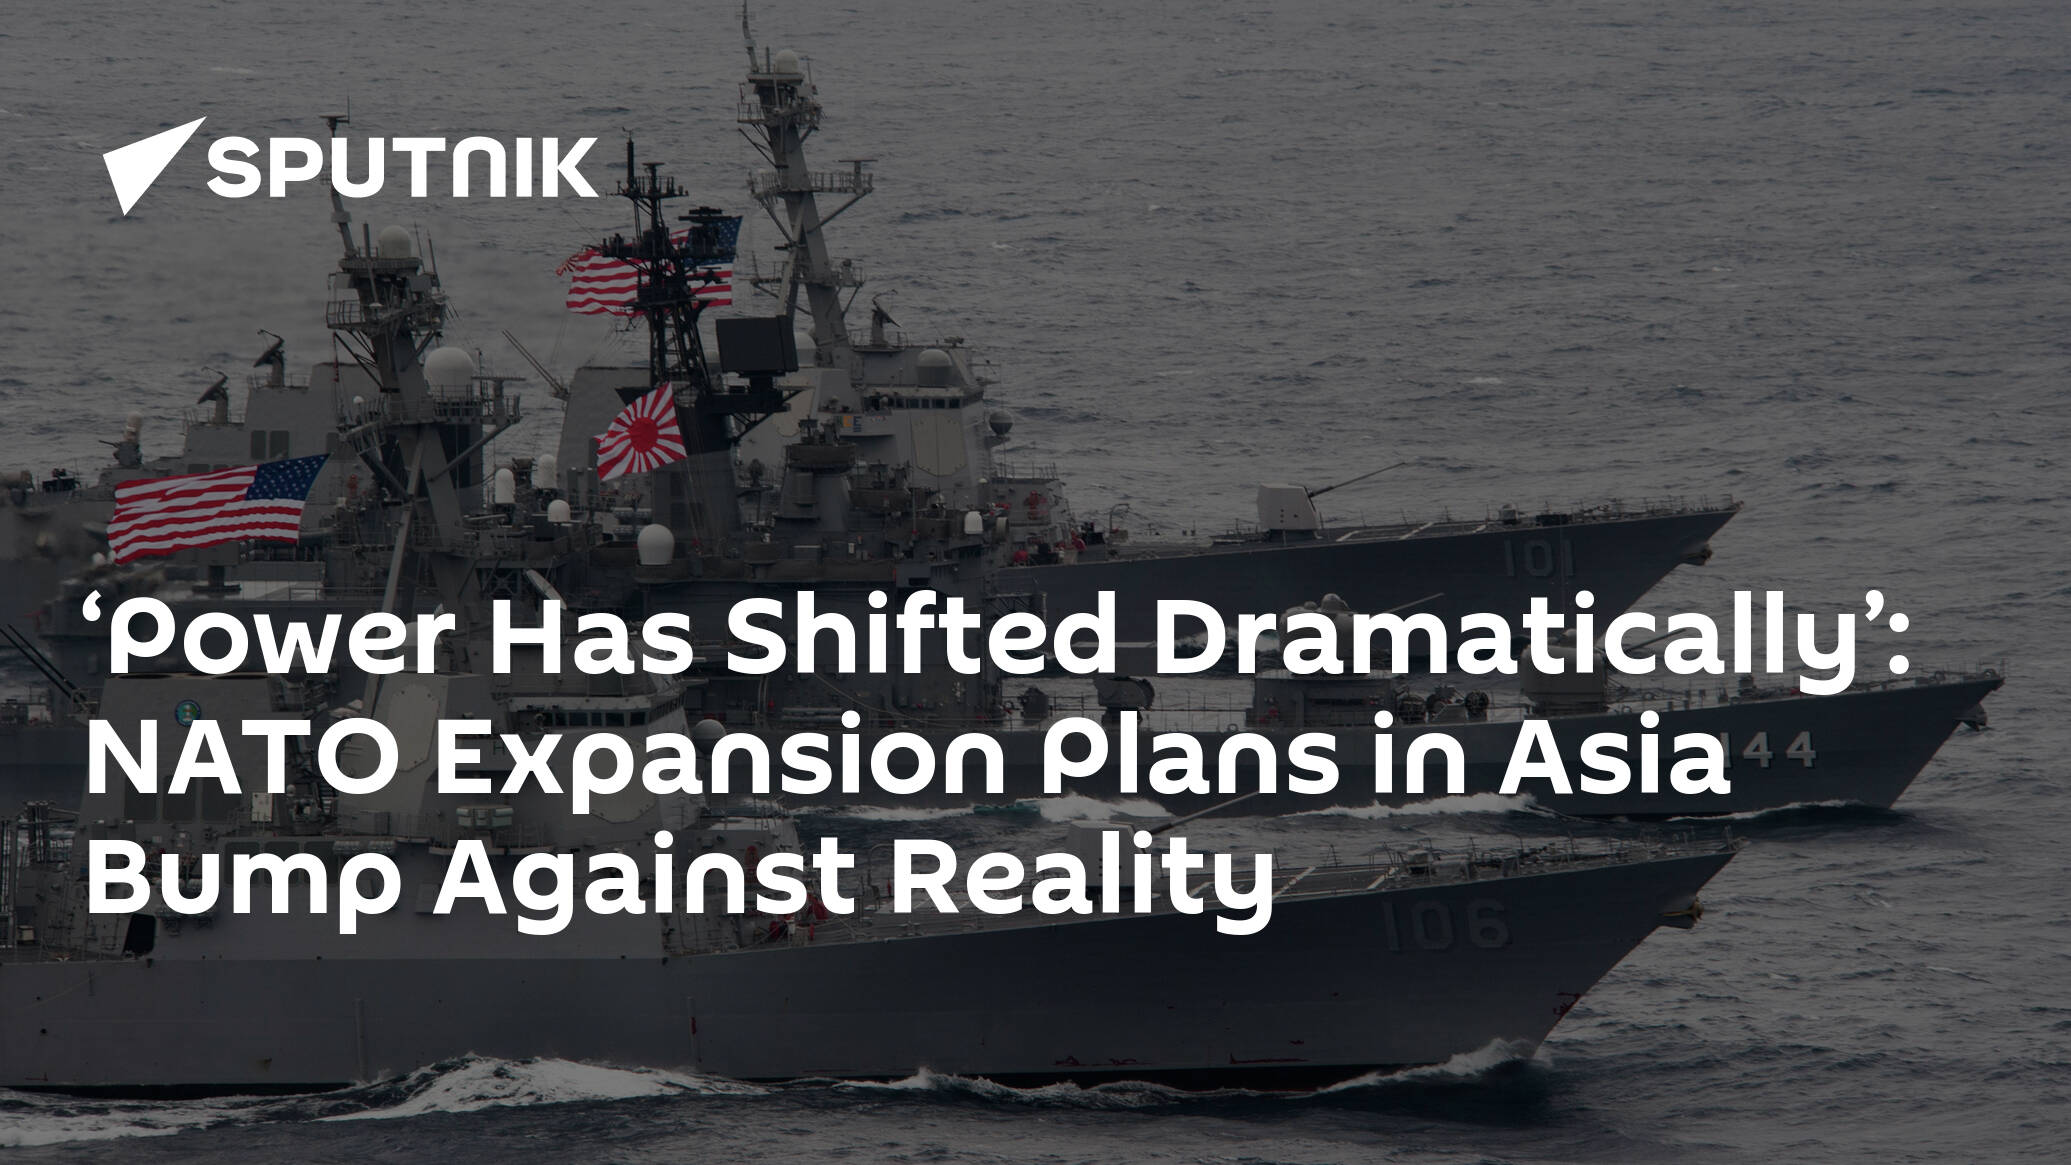 NATO Expansion Plans in Asia Bump Against Reality